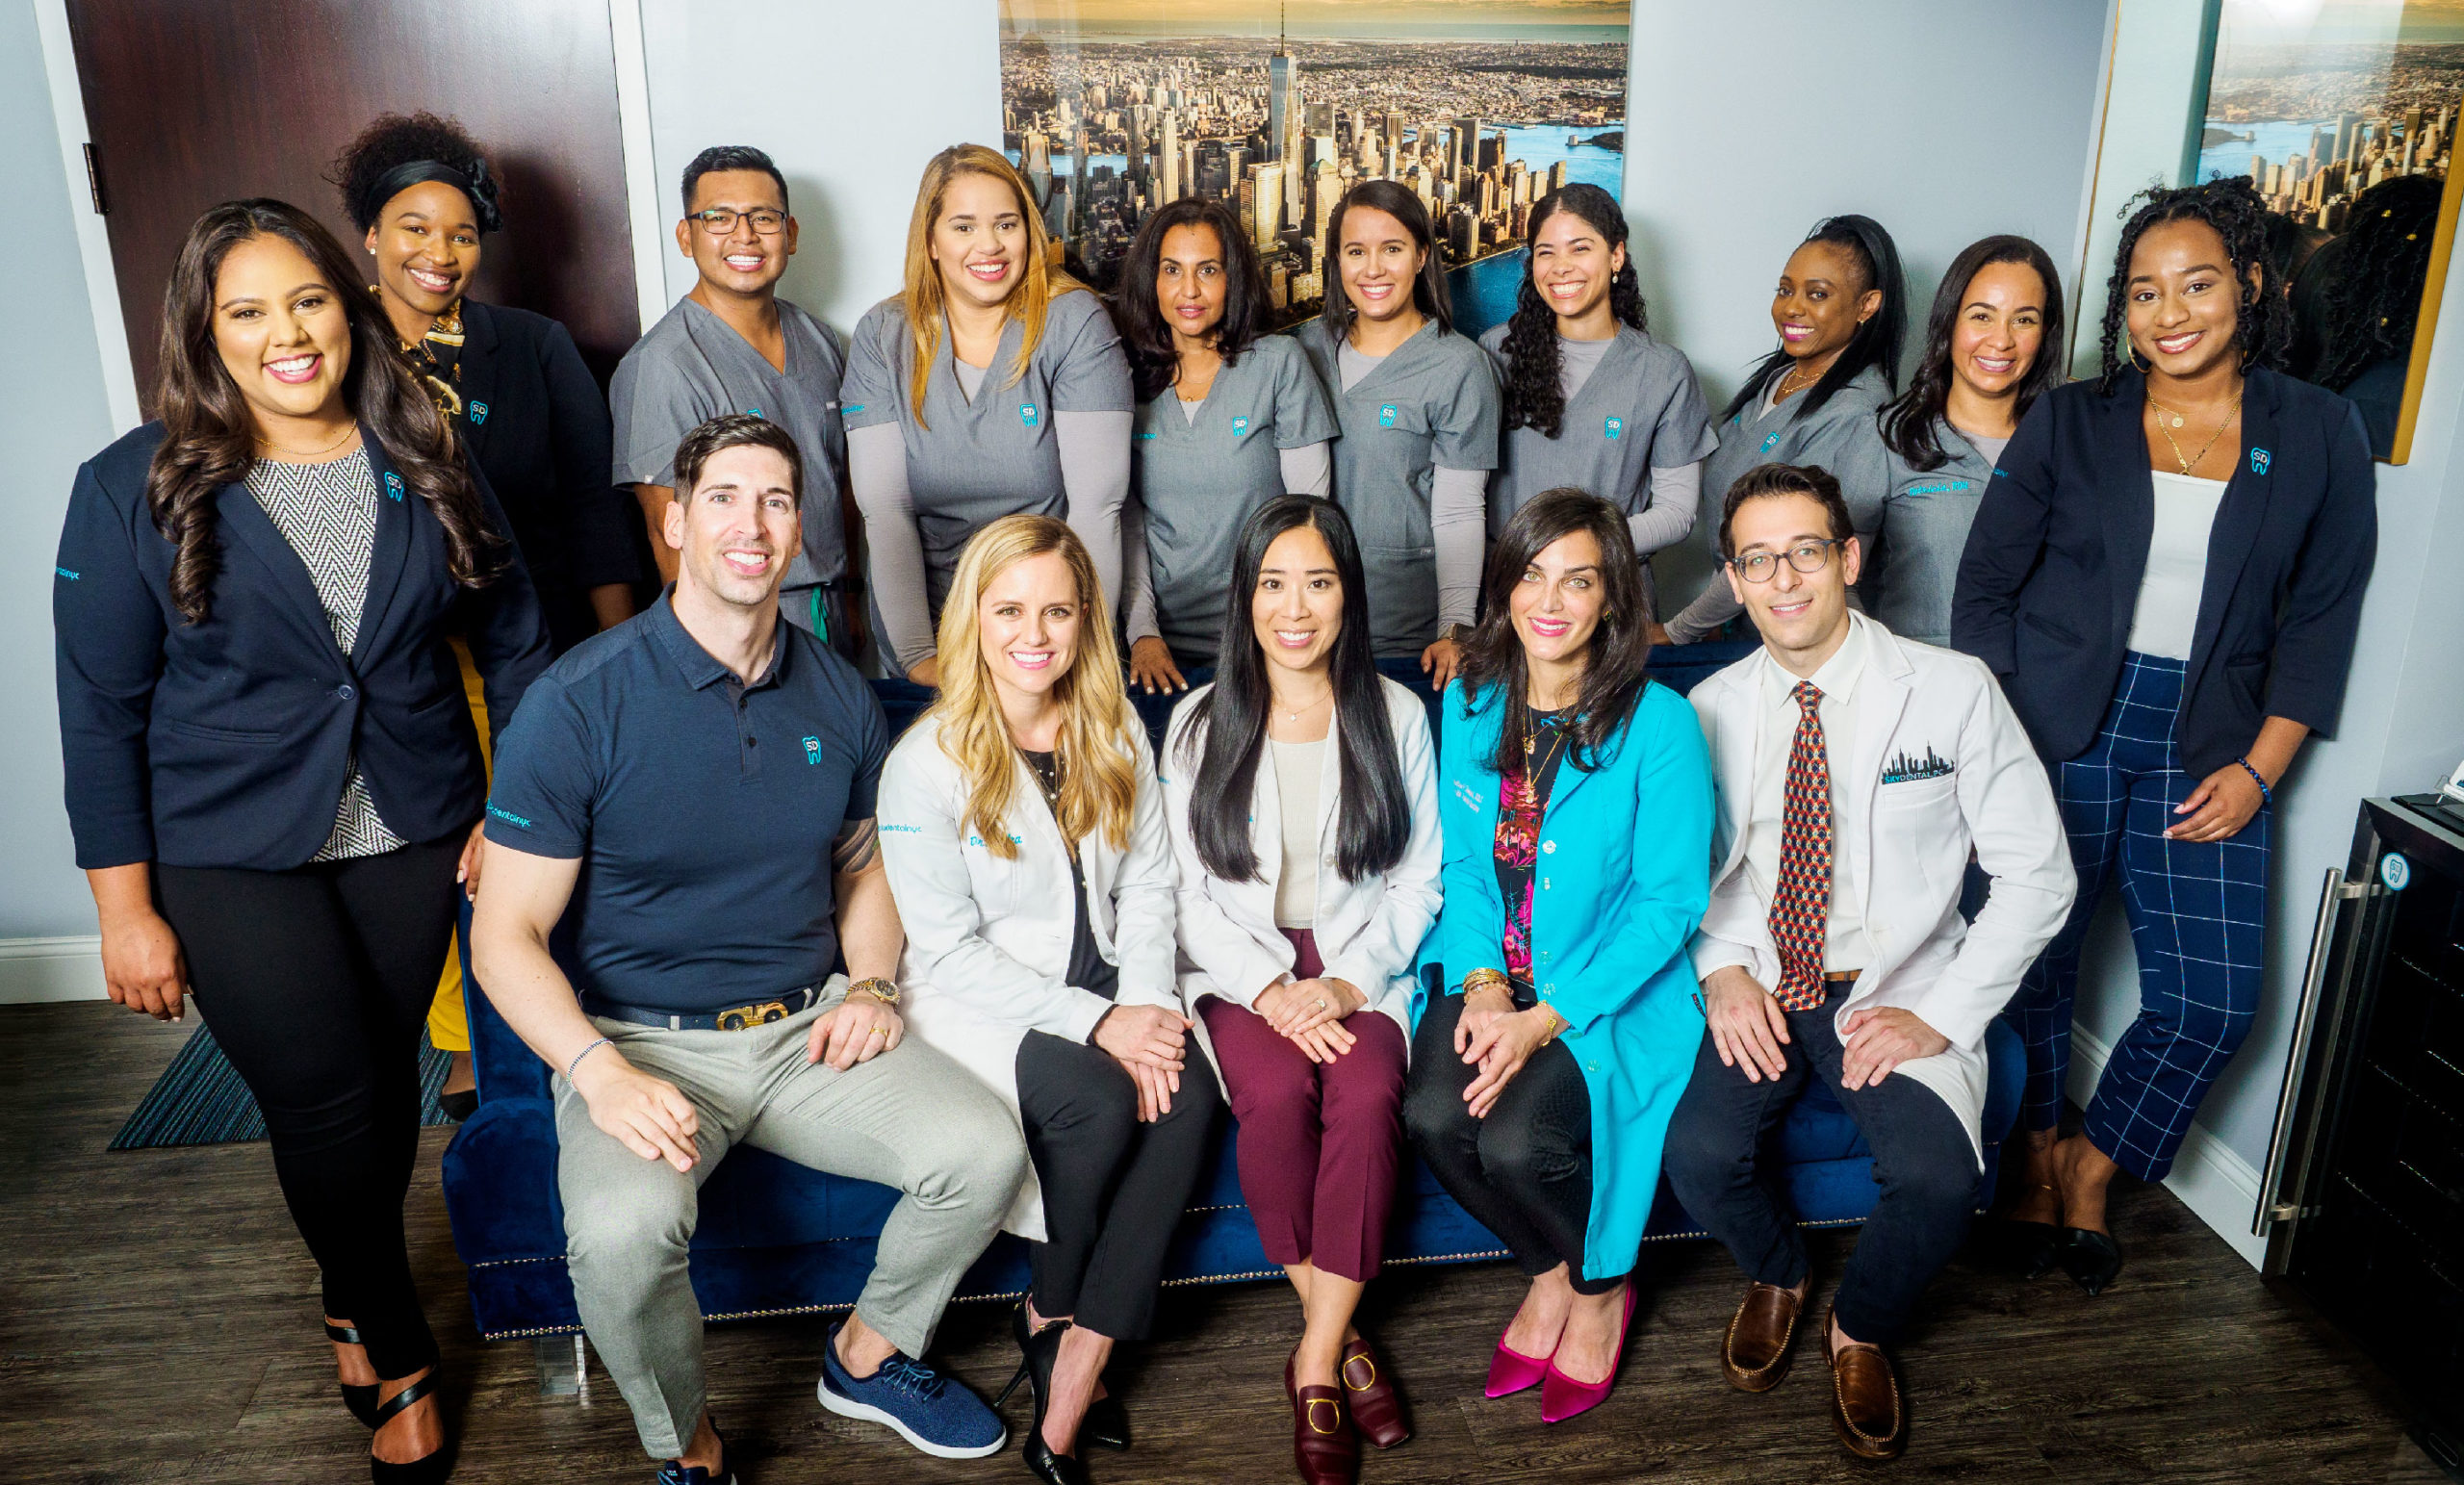 Sky Dental NYC team poses together indoors, doctors and Mark seated, hygienists and assistants standing behind them.